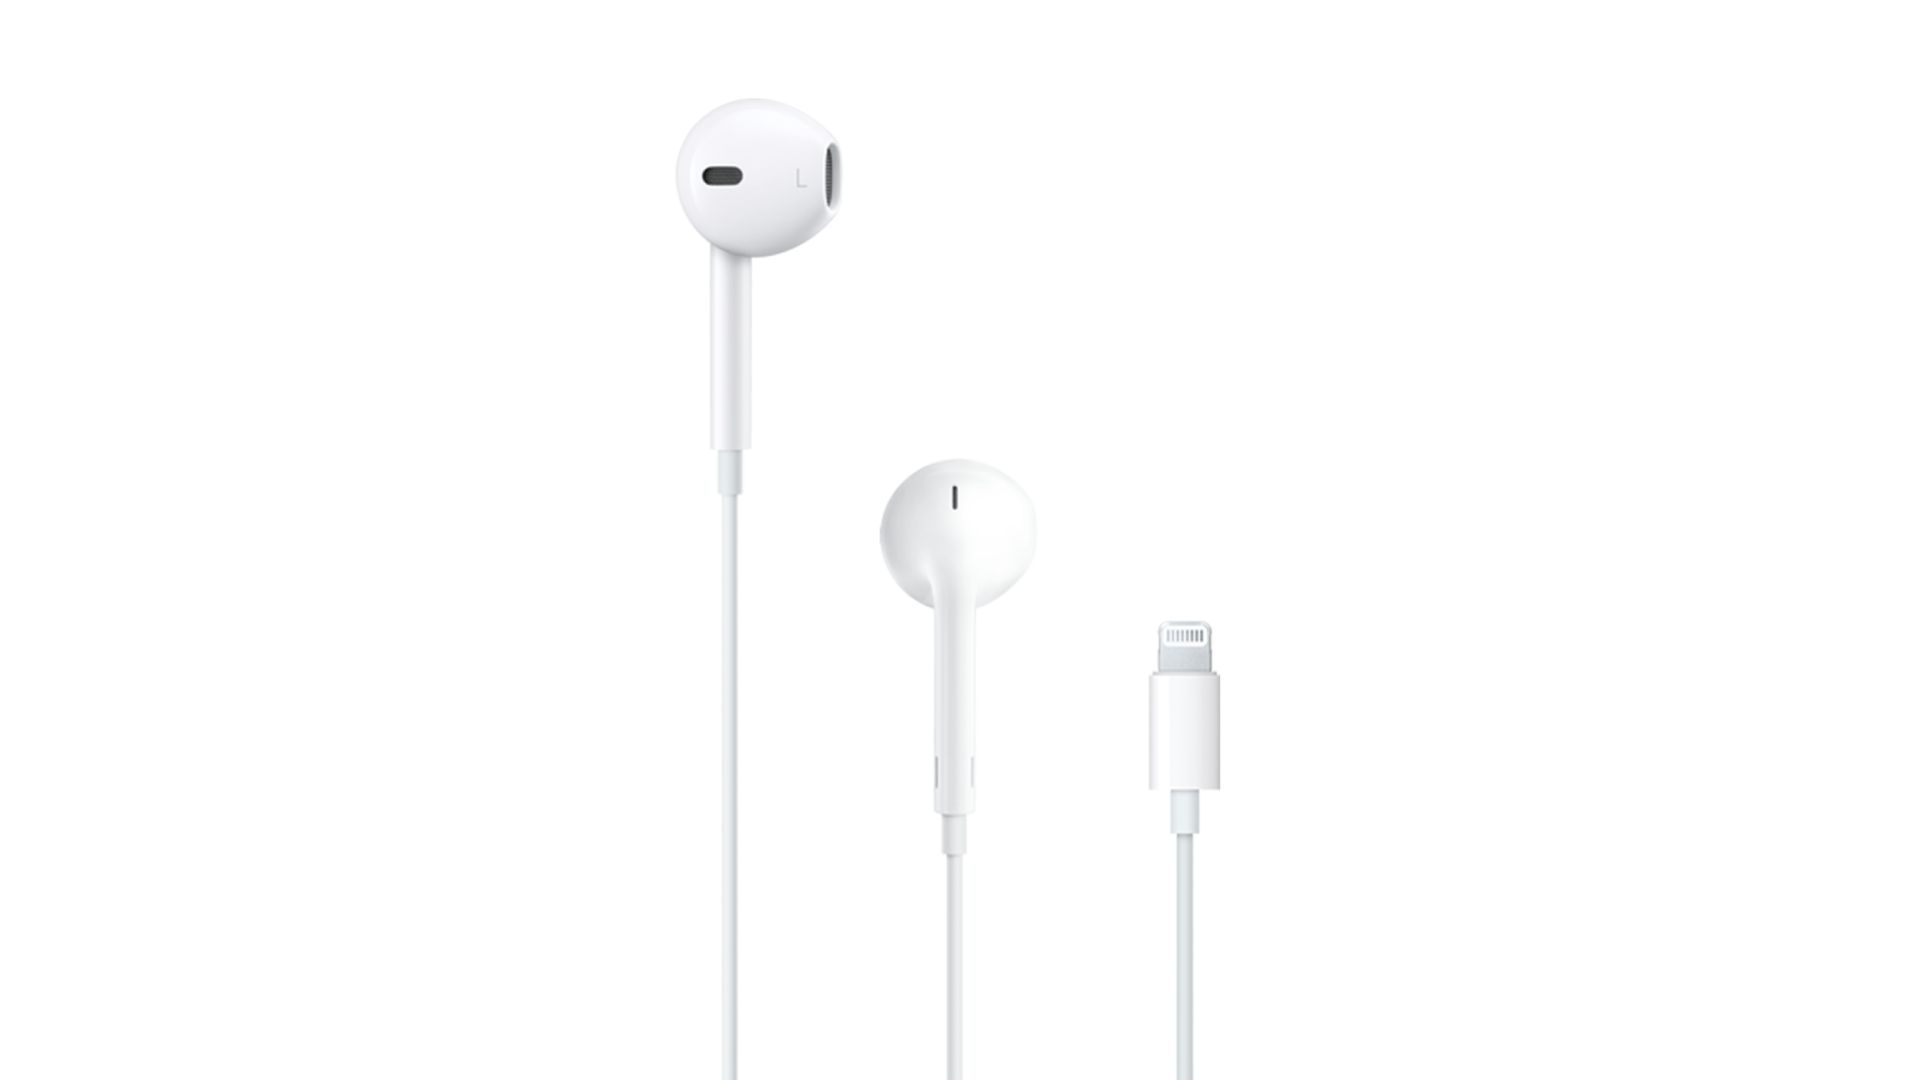 Buy EarPods with Lightning Connector online, Apple Store